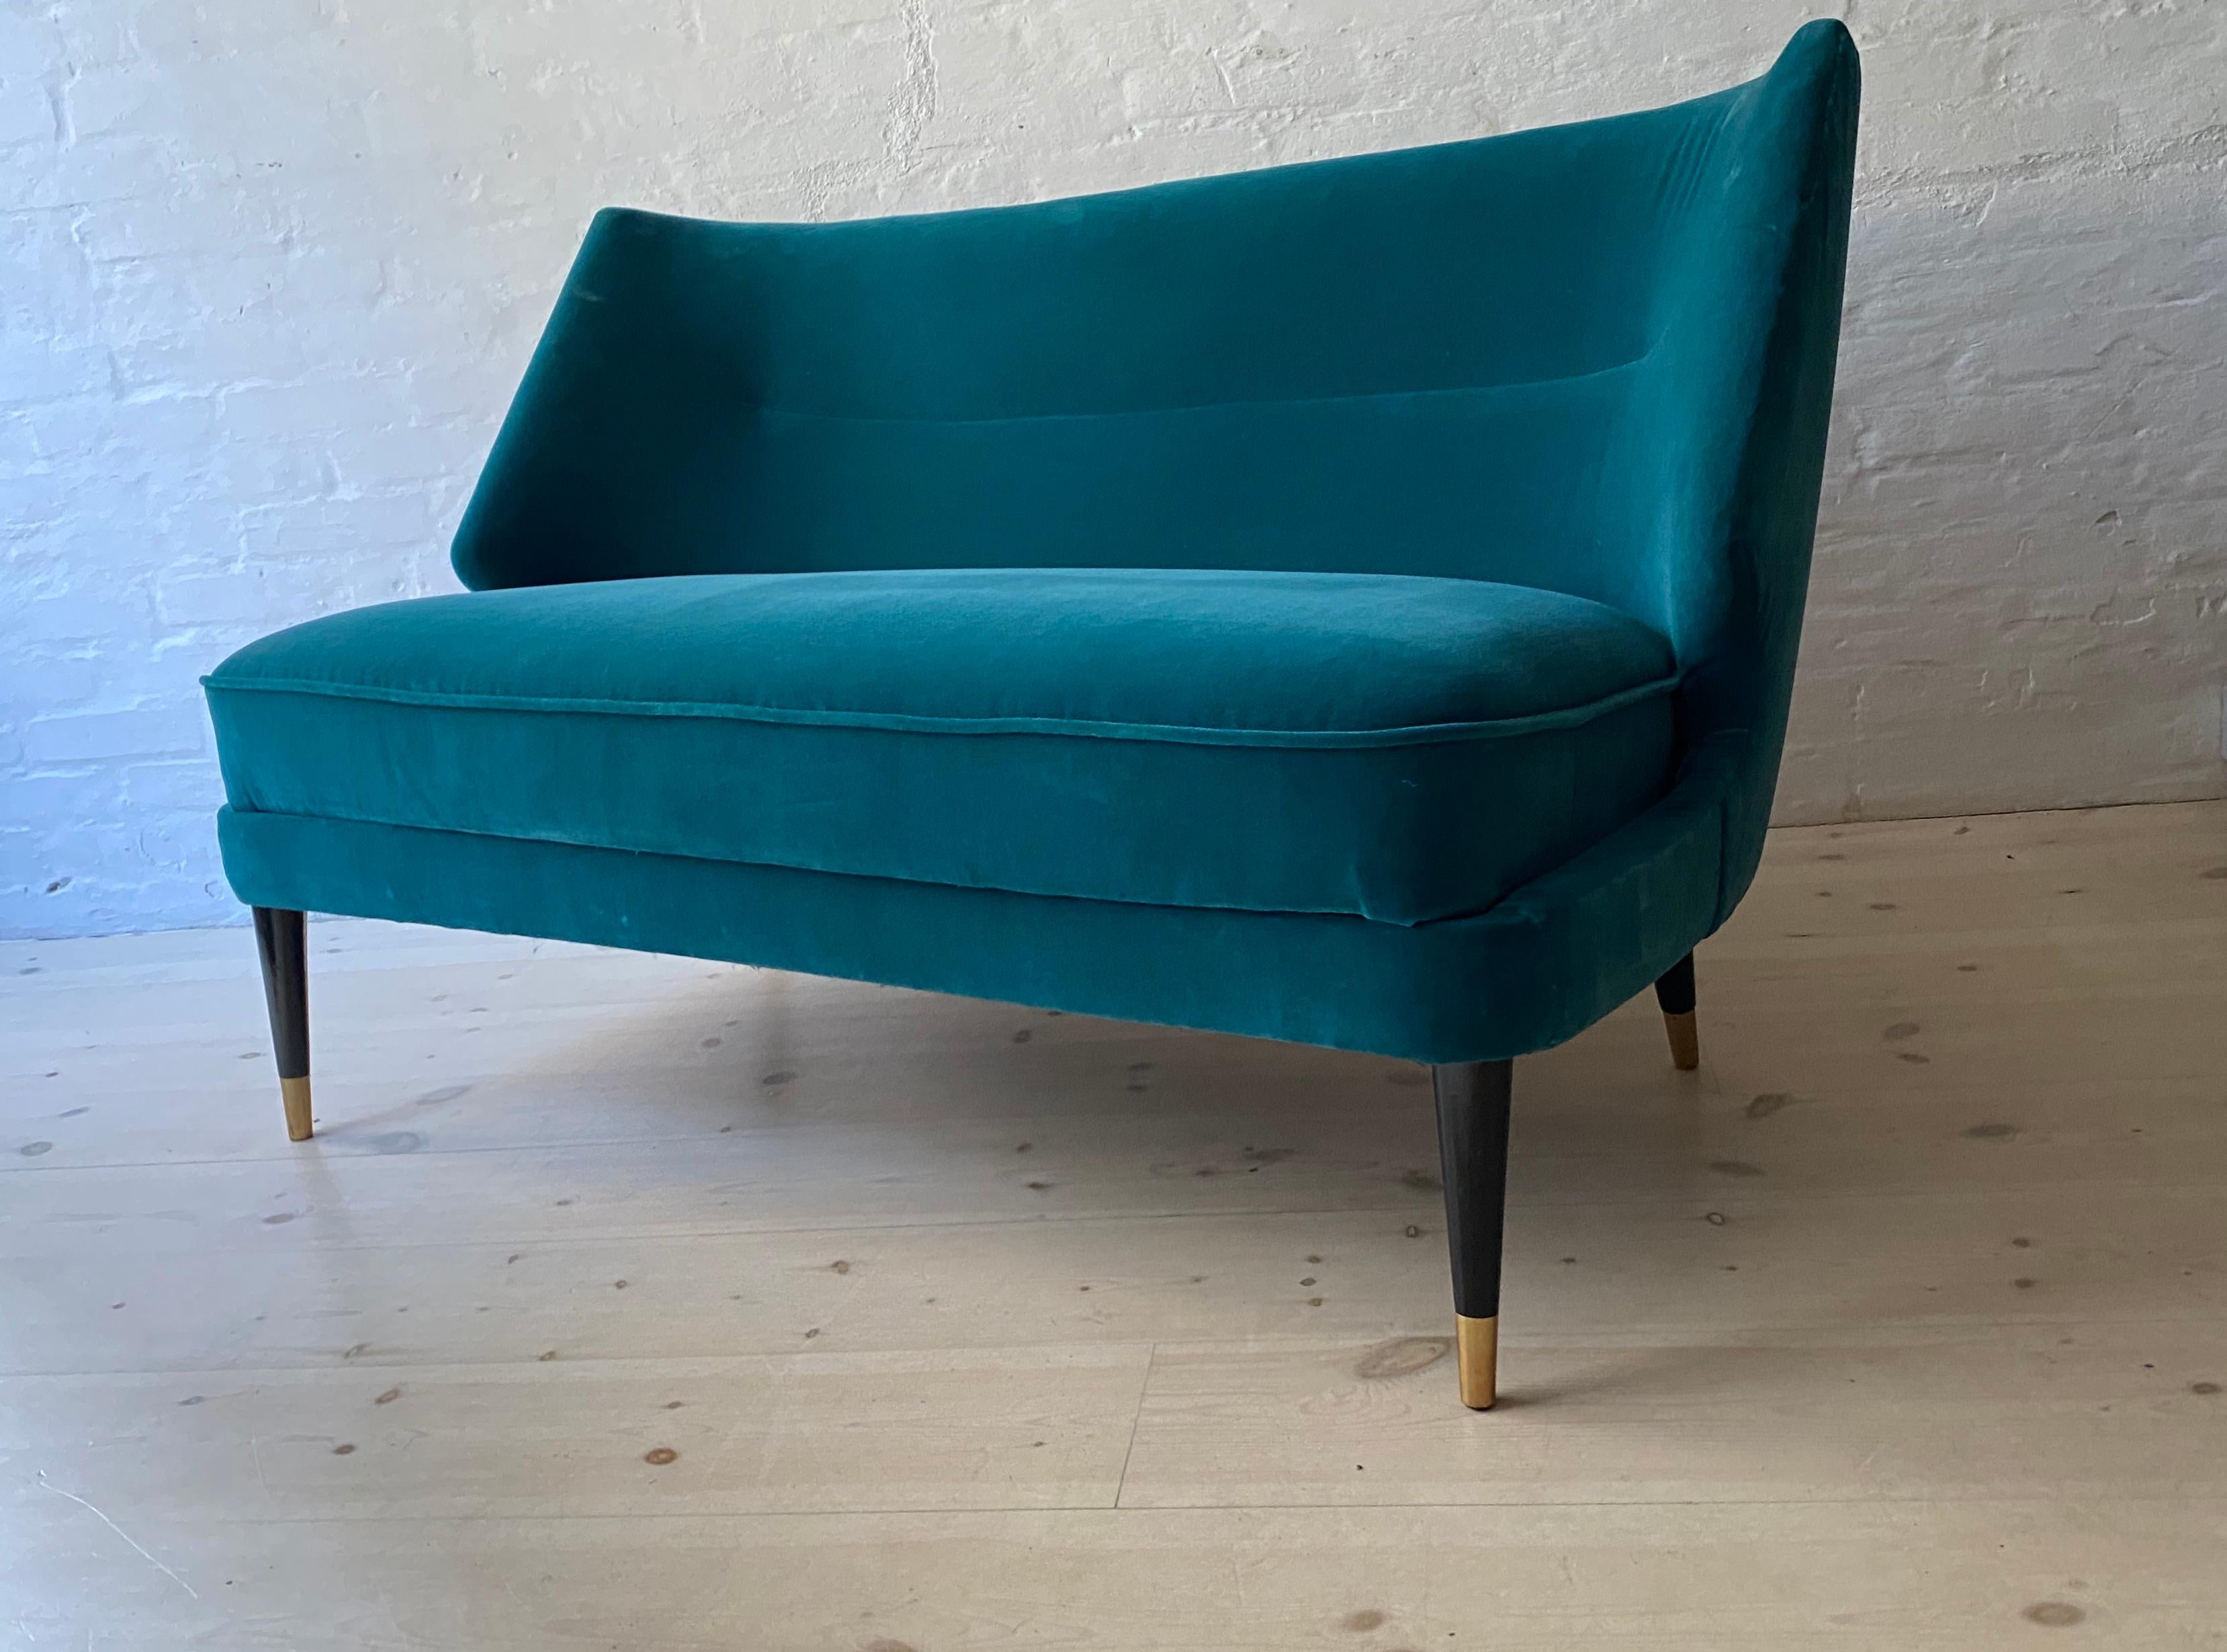 A Danish upholstered sofa by Arne Wahl Iversen, circa 1950-1960, with a angular and curved back, drop-in upholstered seat raised on ebonized circular tapered legs ending with brass caps.
Recently upholstered in petrol color velvet.